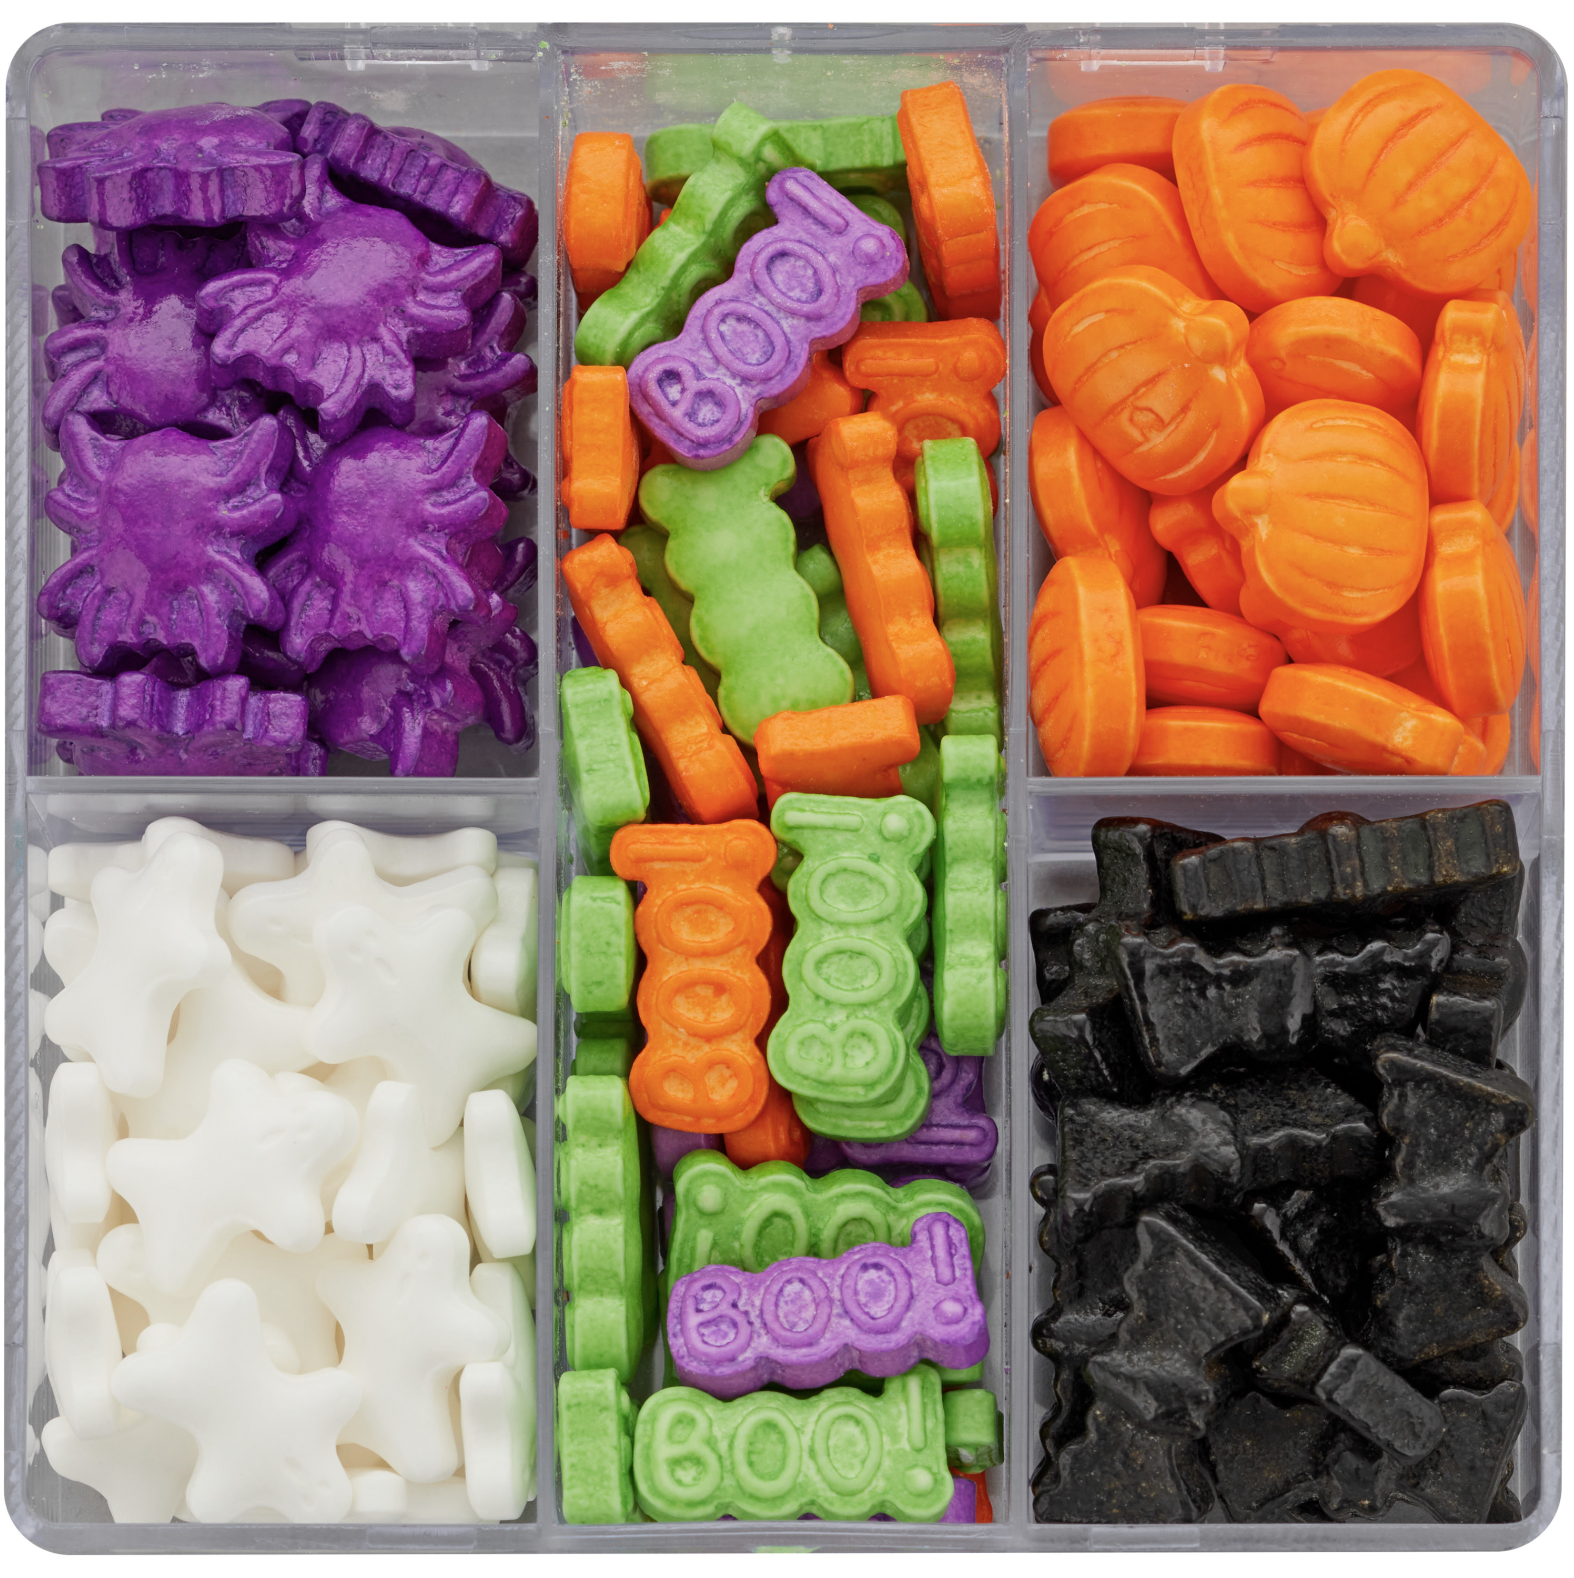 Candies in the shapes of ghosts, spiders, witches, pumpkins, and letters that spell &quot;boo&quot;